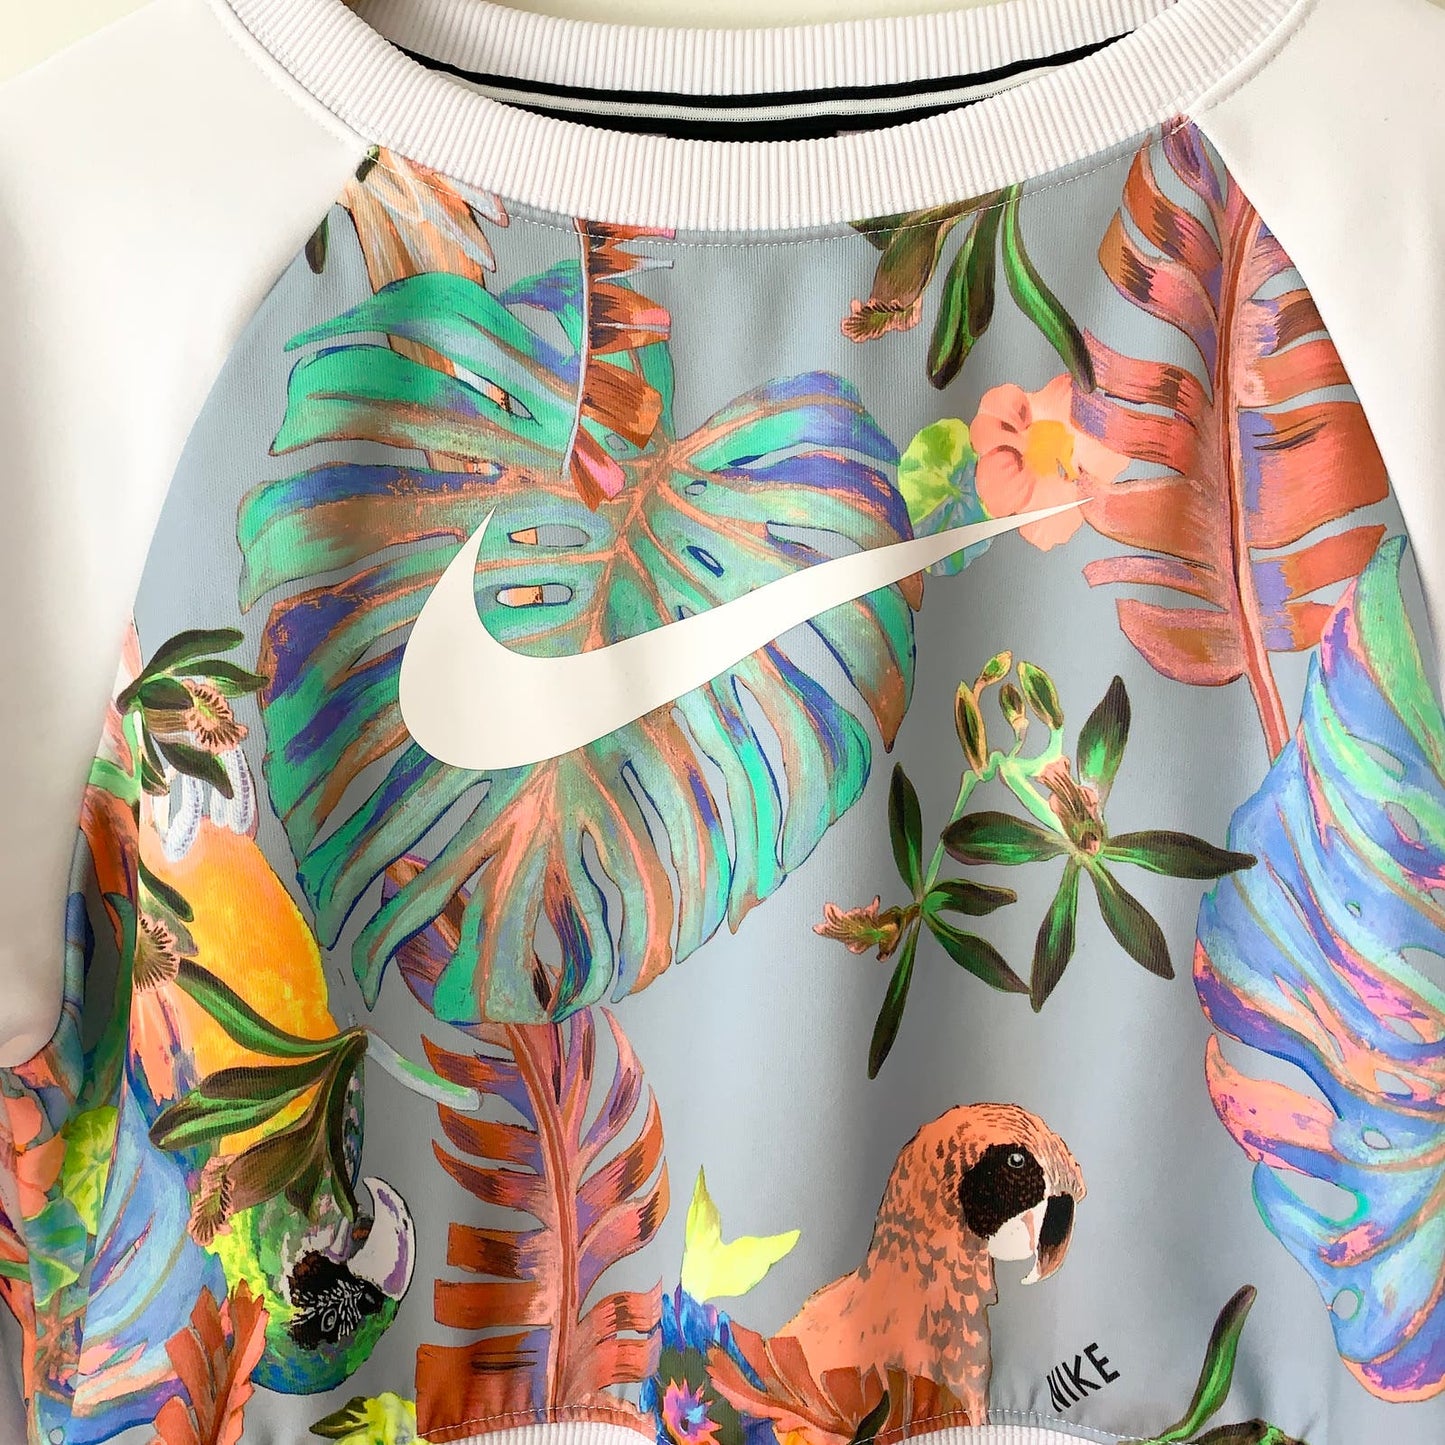 NIKE Buzo Hyper Femme Tropical Floral Cropped Sweatshirt Size Small White